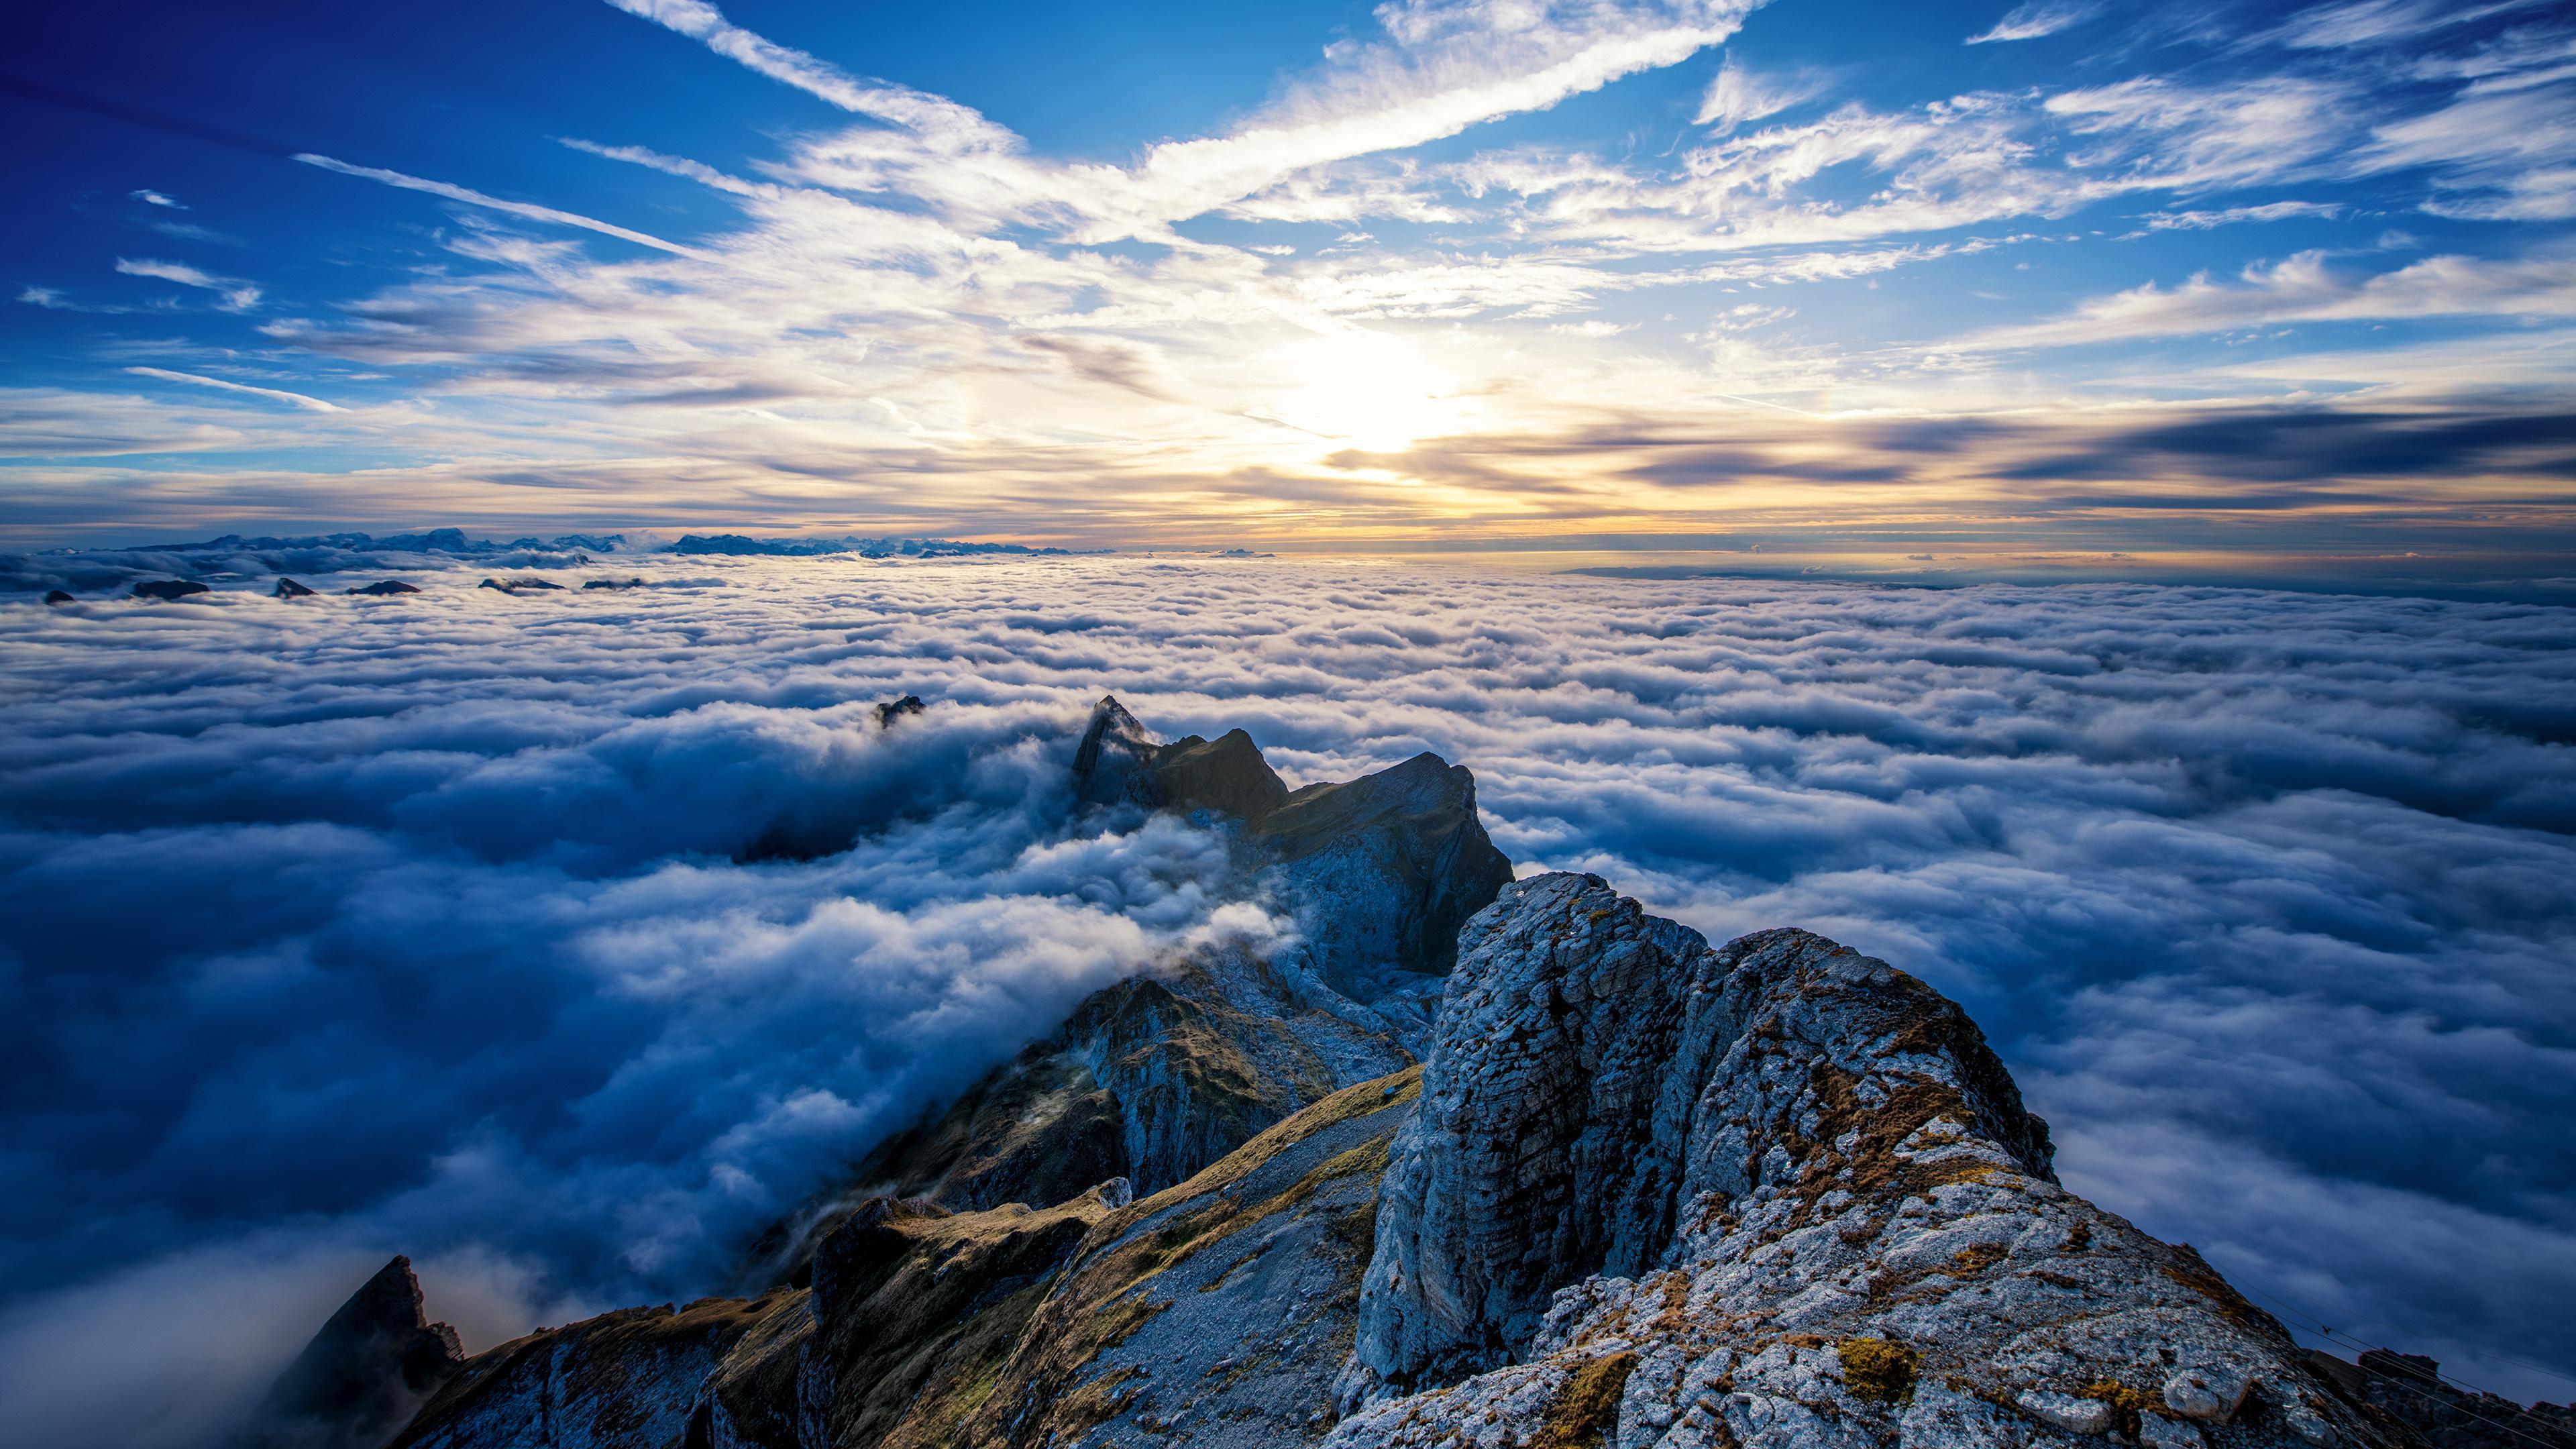 Mountain Peak Above Clouds In Blue Sky With Sun